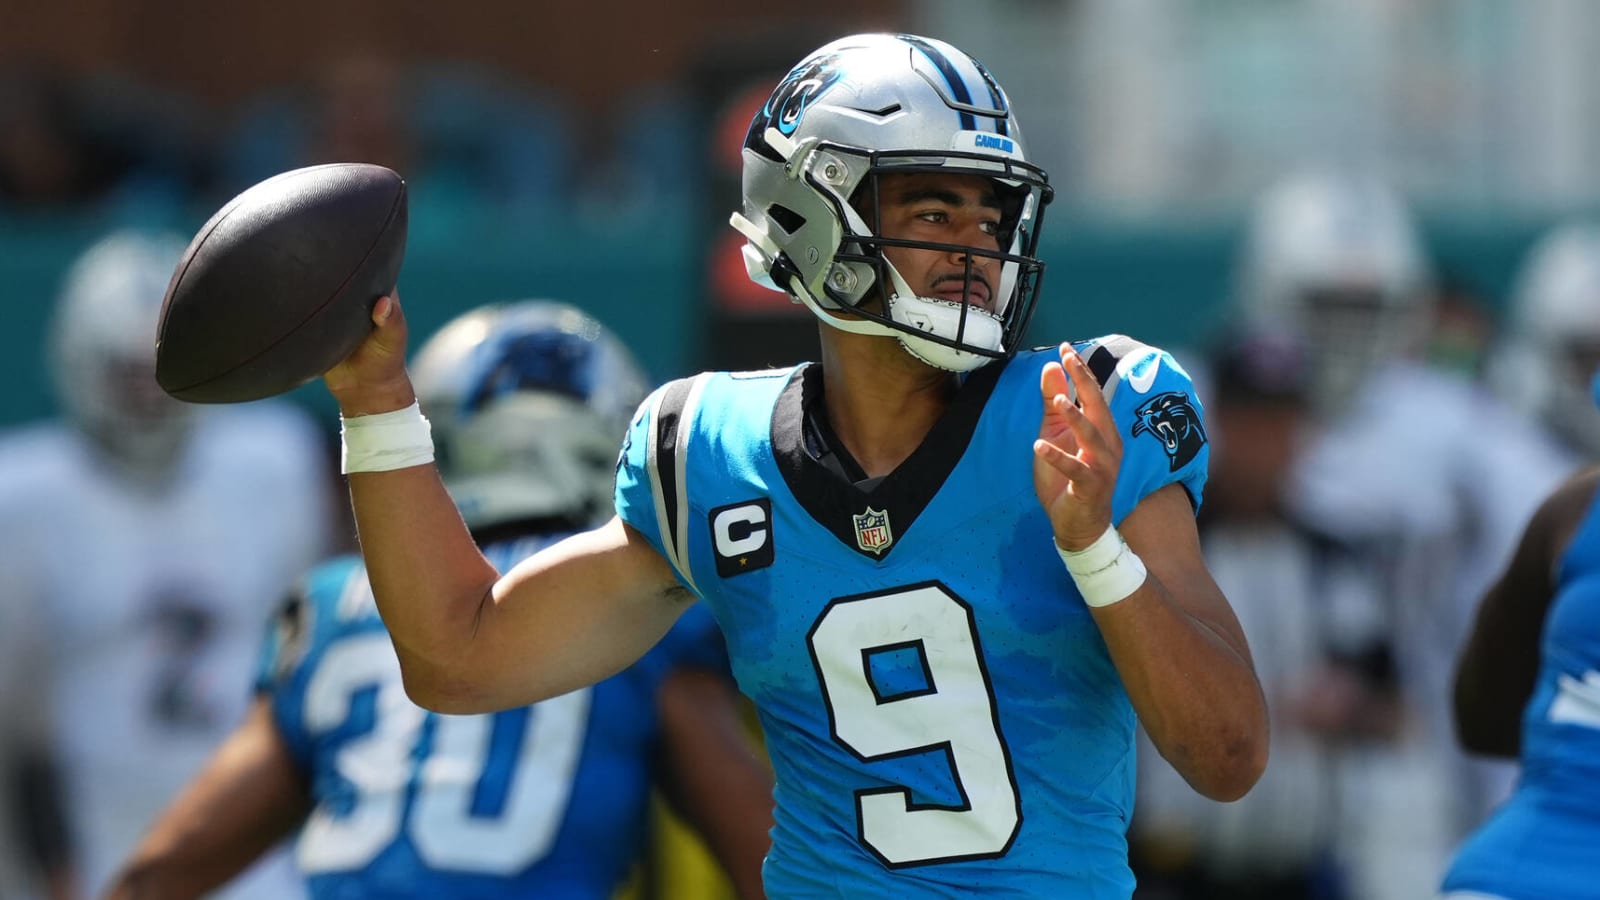 NFC South Week 8 predictions: Panthers get first win